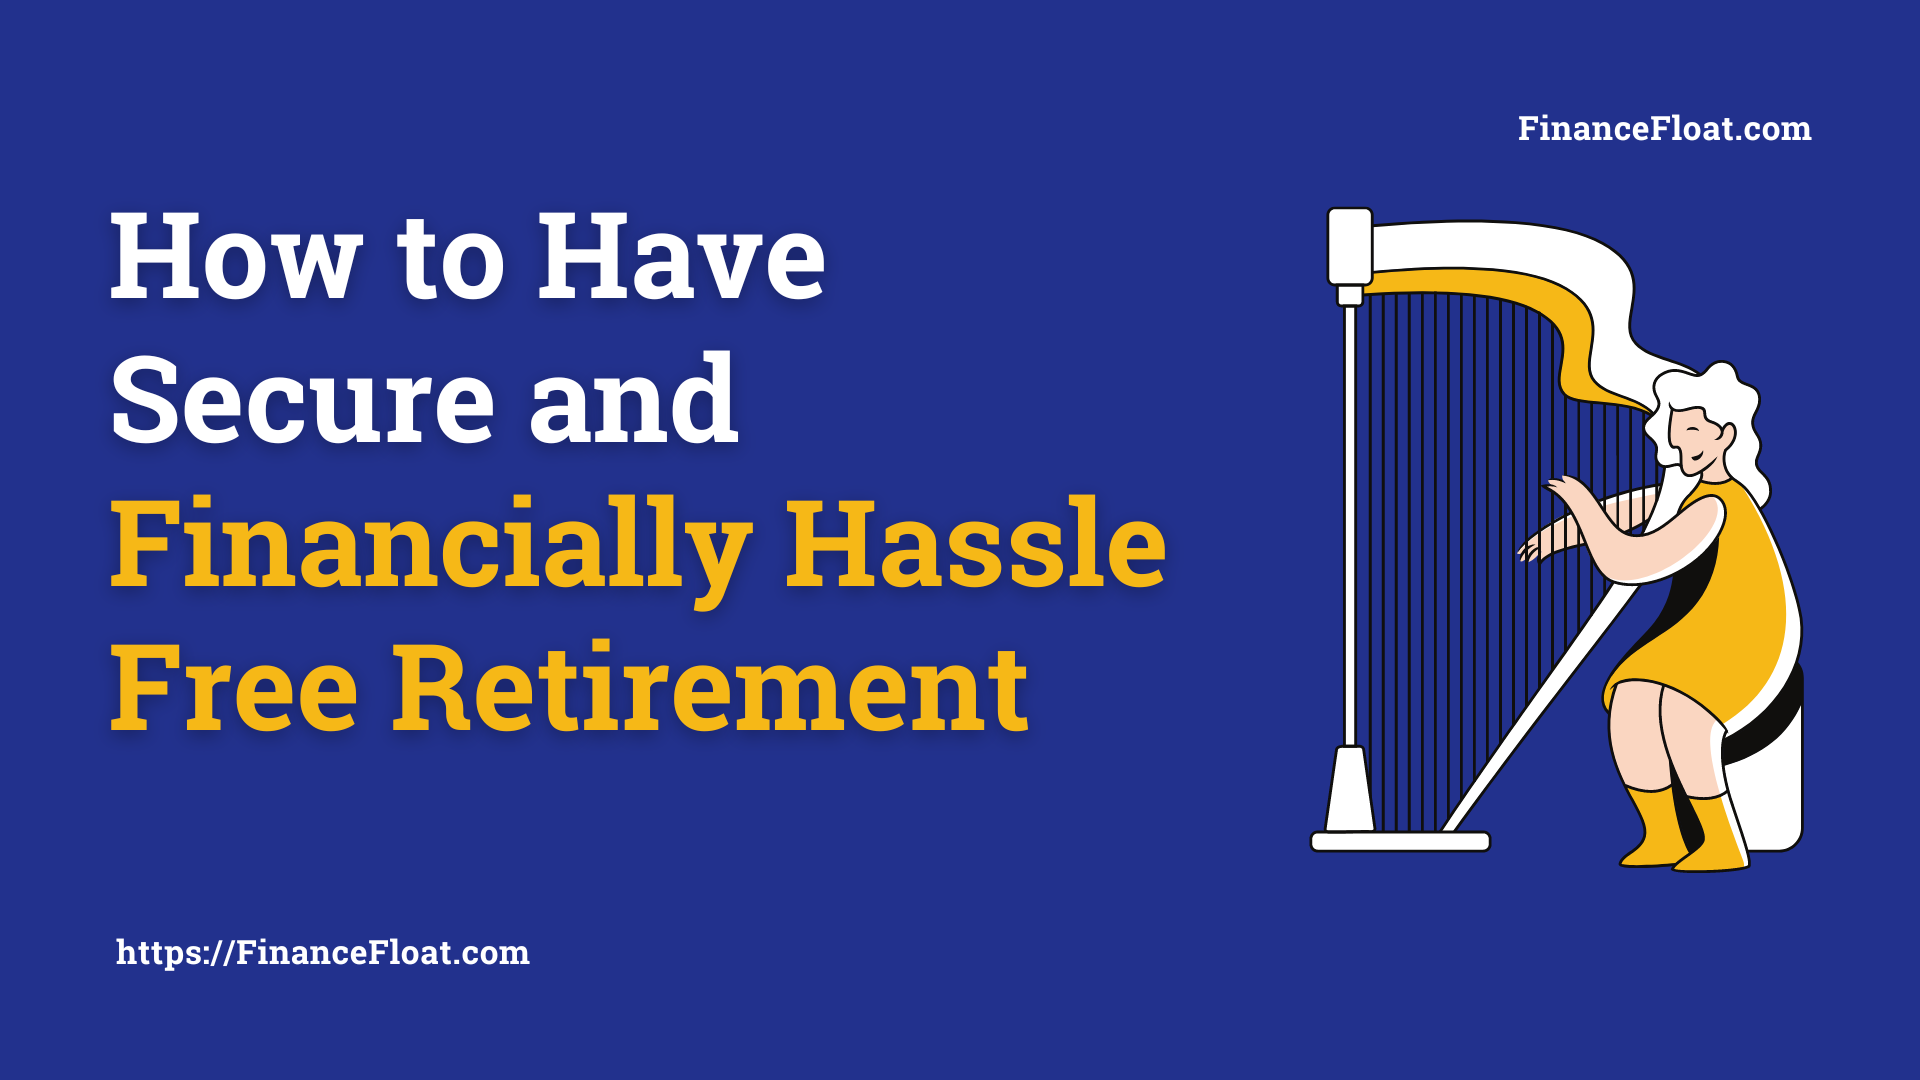 How to Have Secure and Financially Hassle Free Retirement